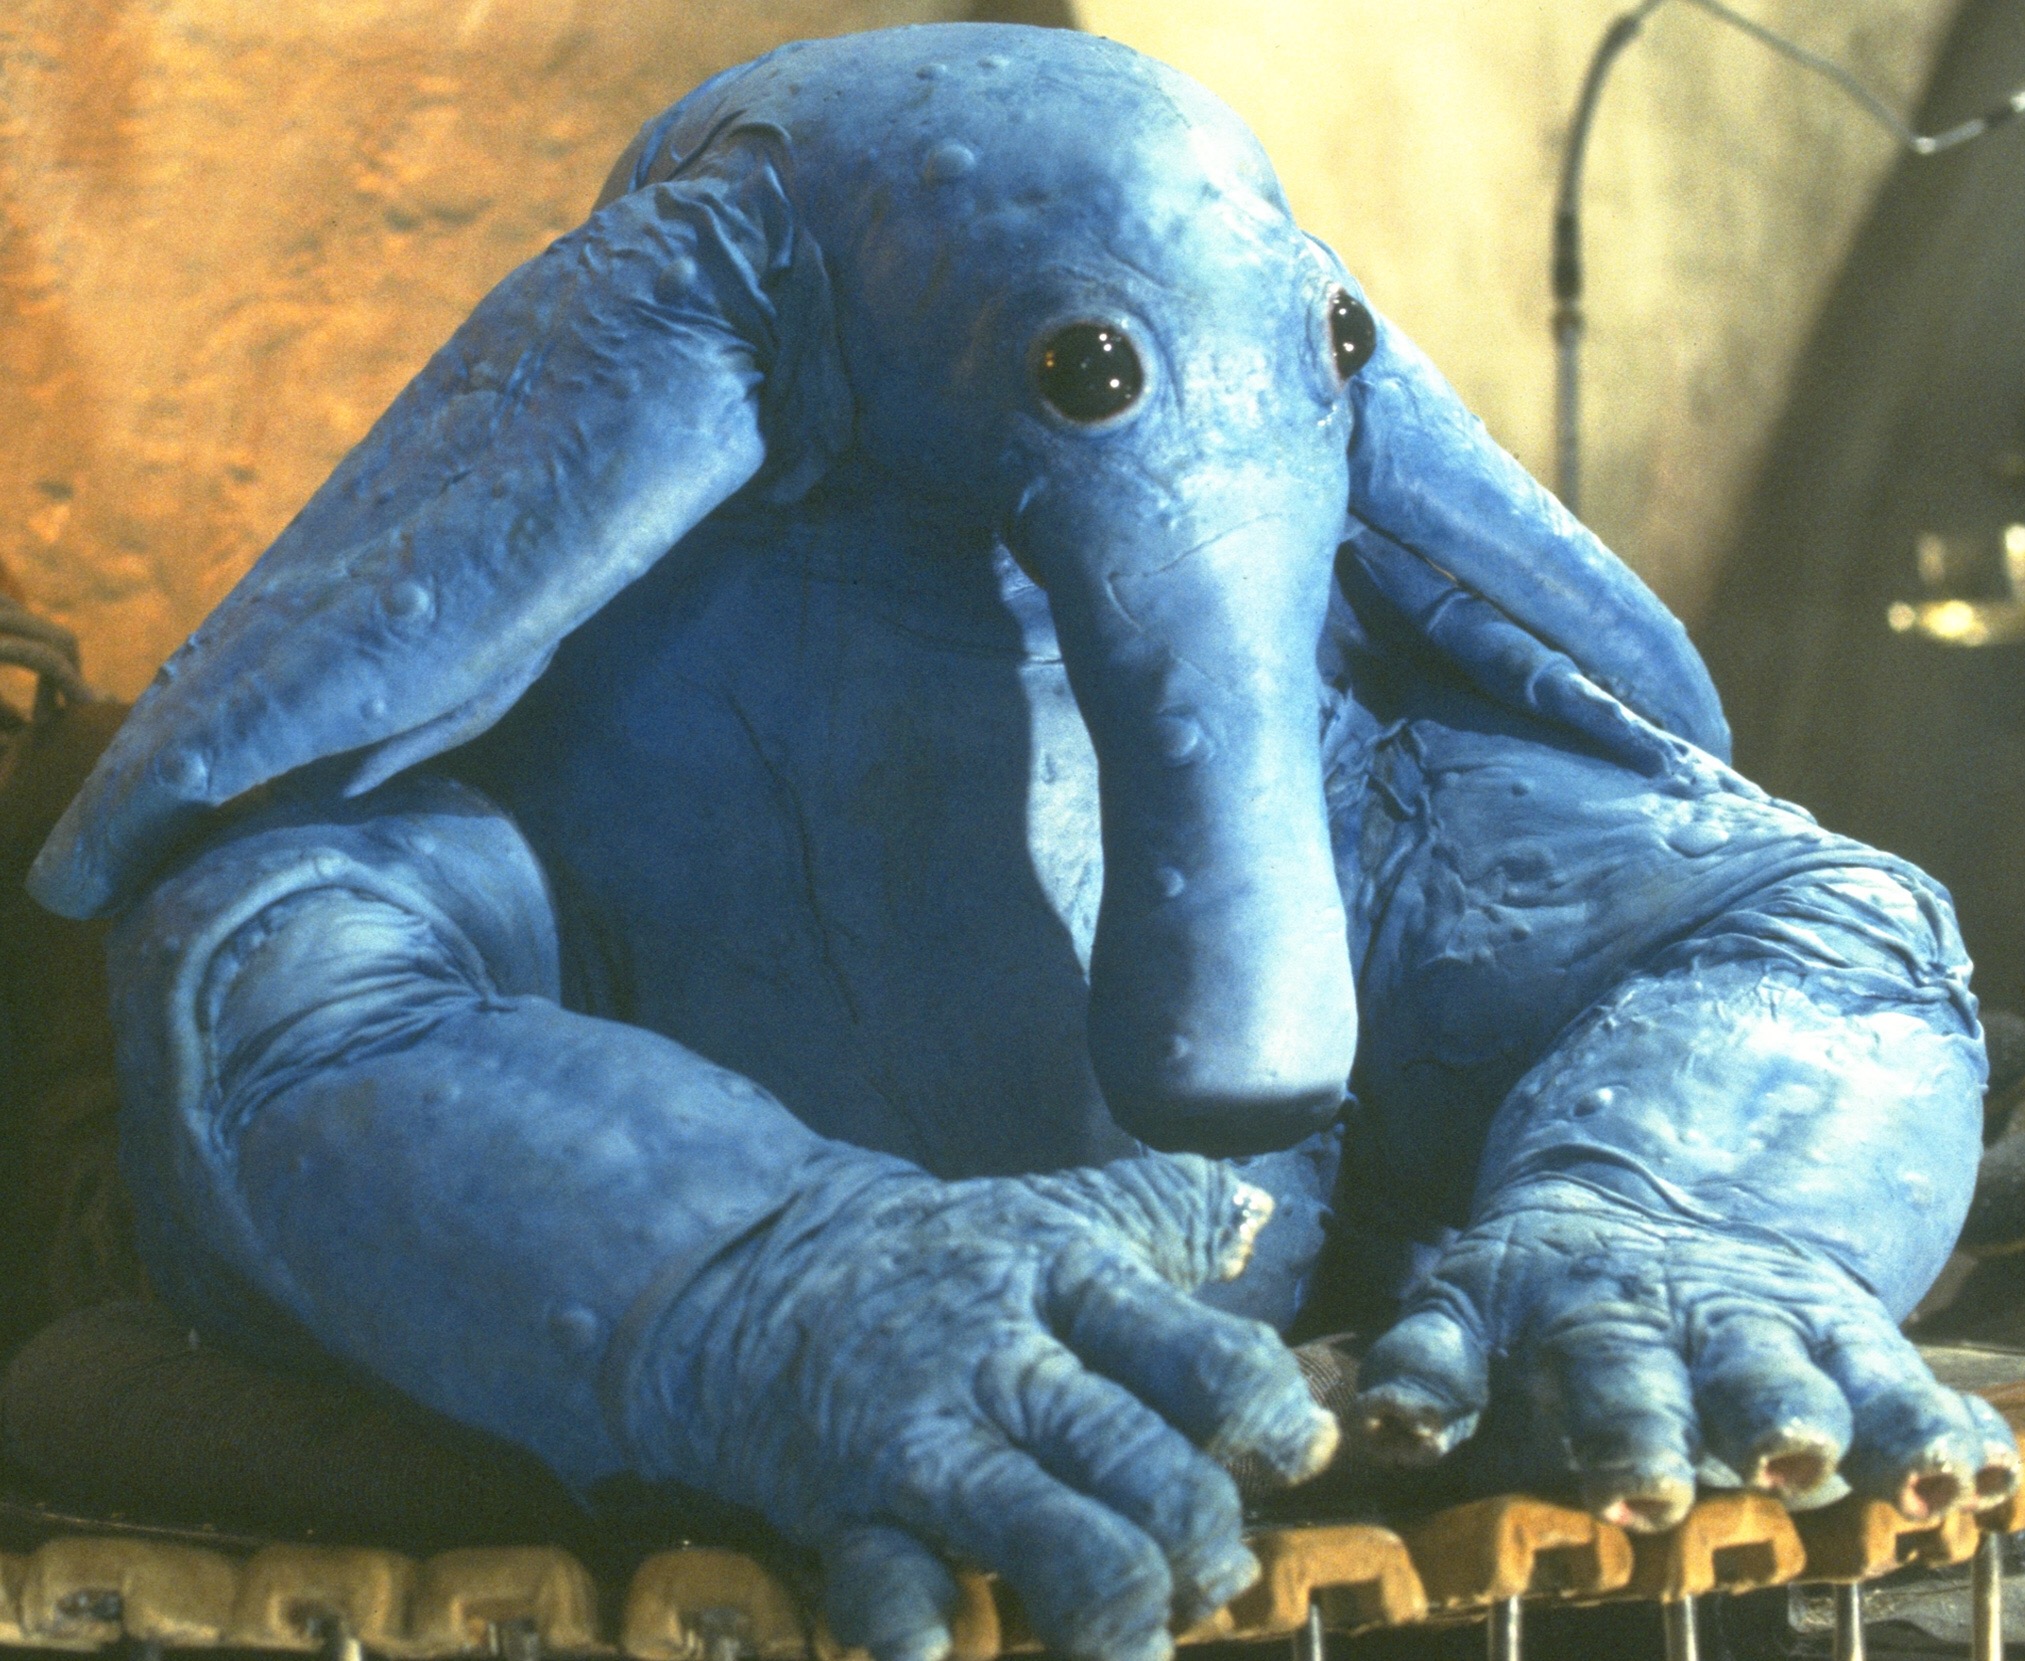 What is the background of Max Rebo?